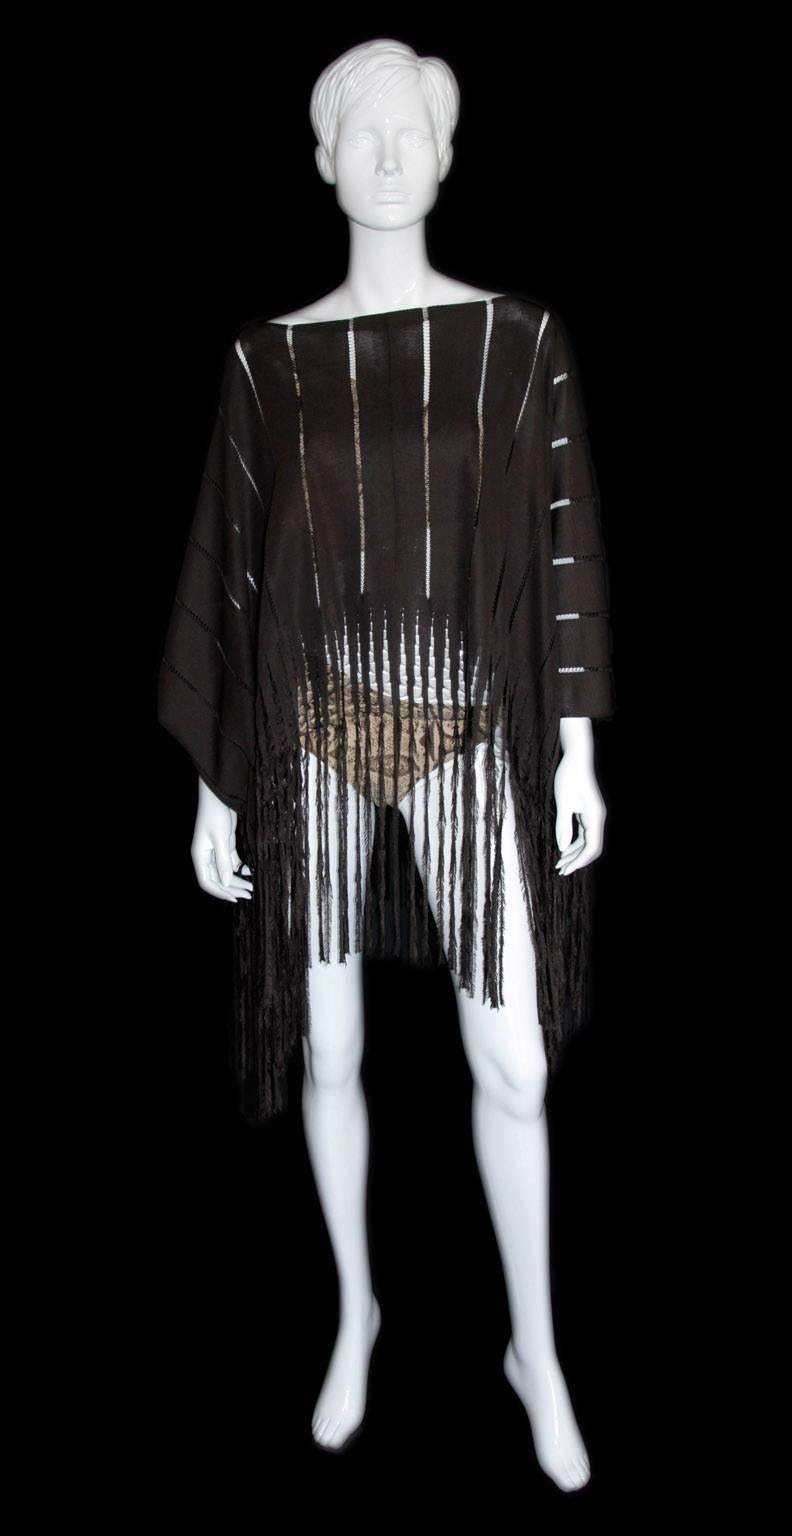 Rare & Iconic Tom Ford for YSL Rive Gauche SS 2002 Safari Collection Chocolate Brown Silk Poncho!

The quintessential piece from Tom Ford's acclaimed Spring/Summer 2002 Safari/Mombasa Collection for YSL Rive Gauche. This extremely rare & unique